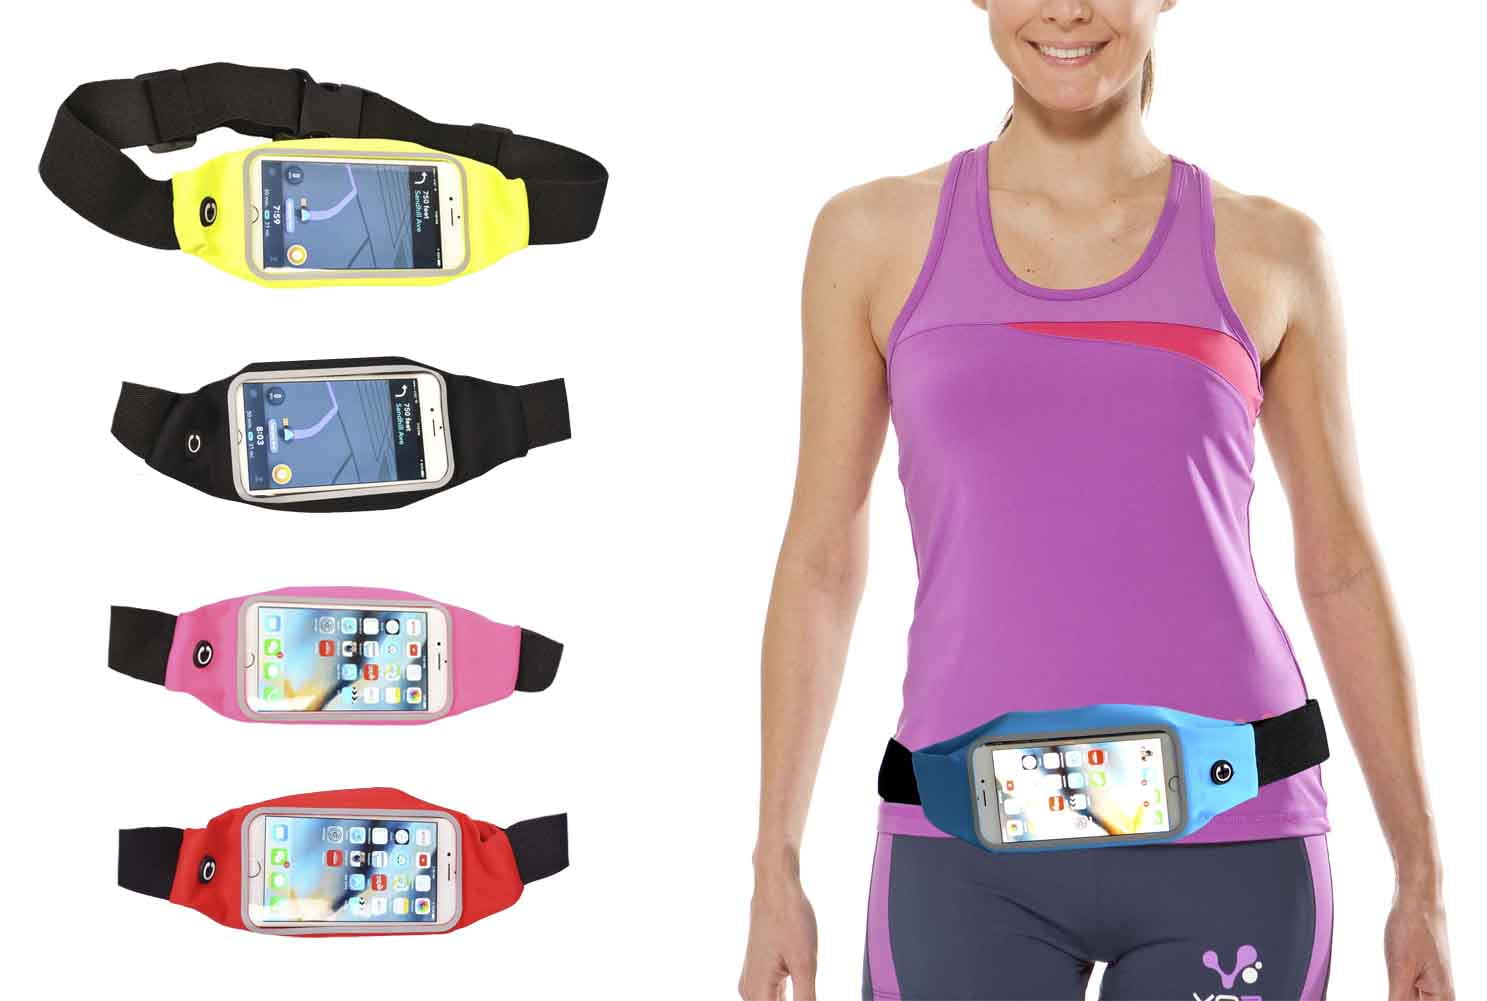 Black N/A Running Belt Waist Pack with Touch Screen Jogging Pocket Belt with Reflective Strips and Headphone Hole,Waterproof Sweatproof Waist Packs with Key Clip for Running Walking Cycling 